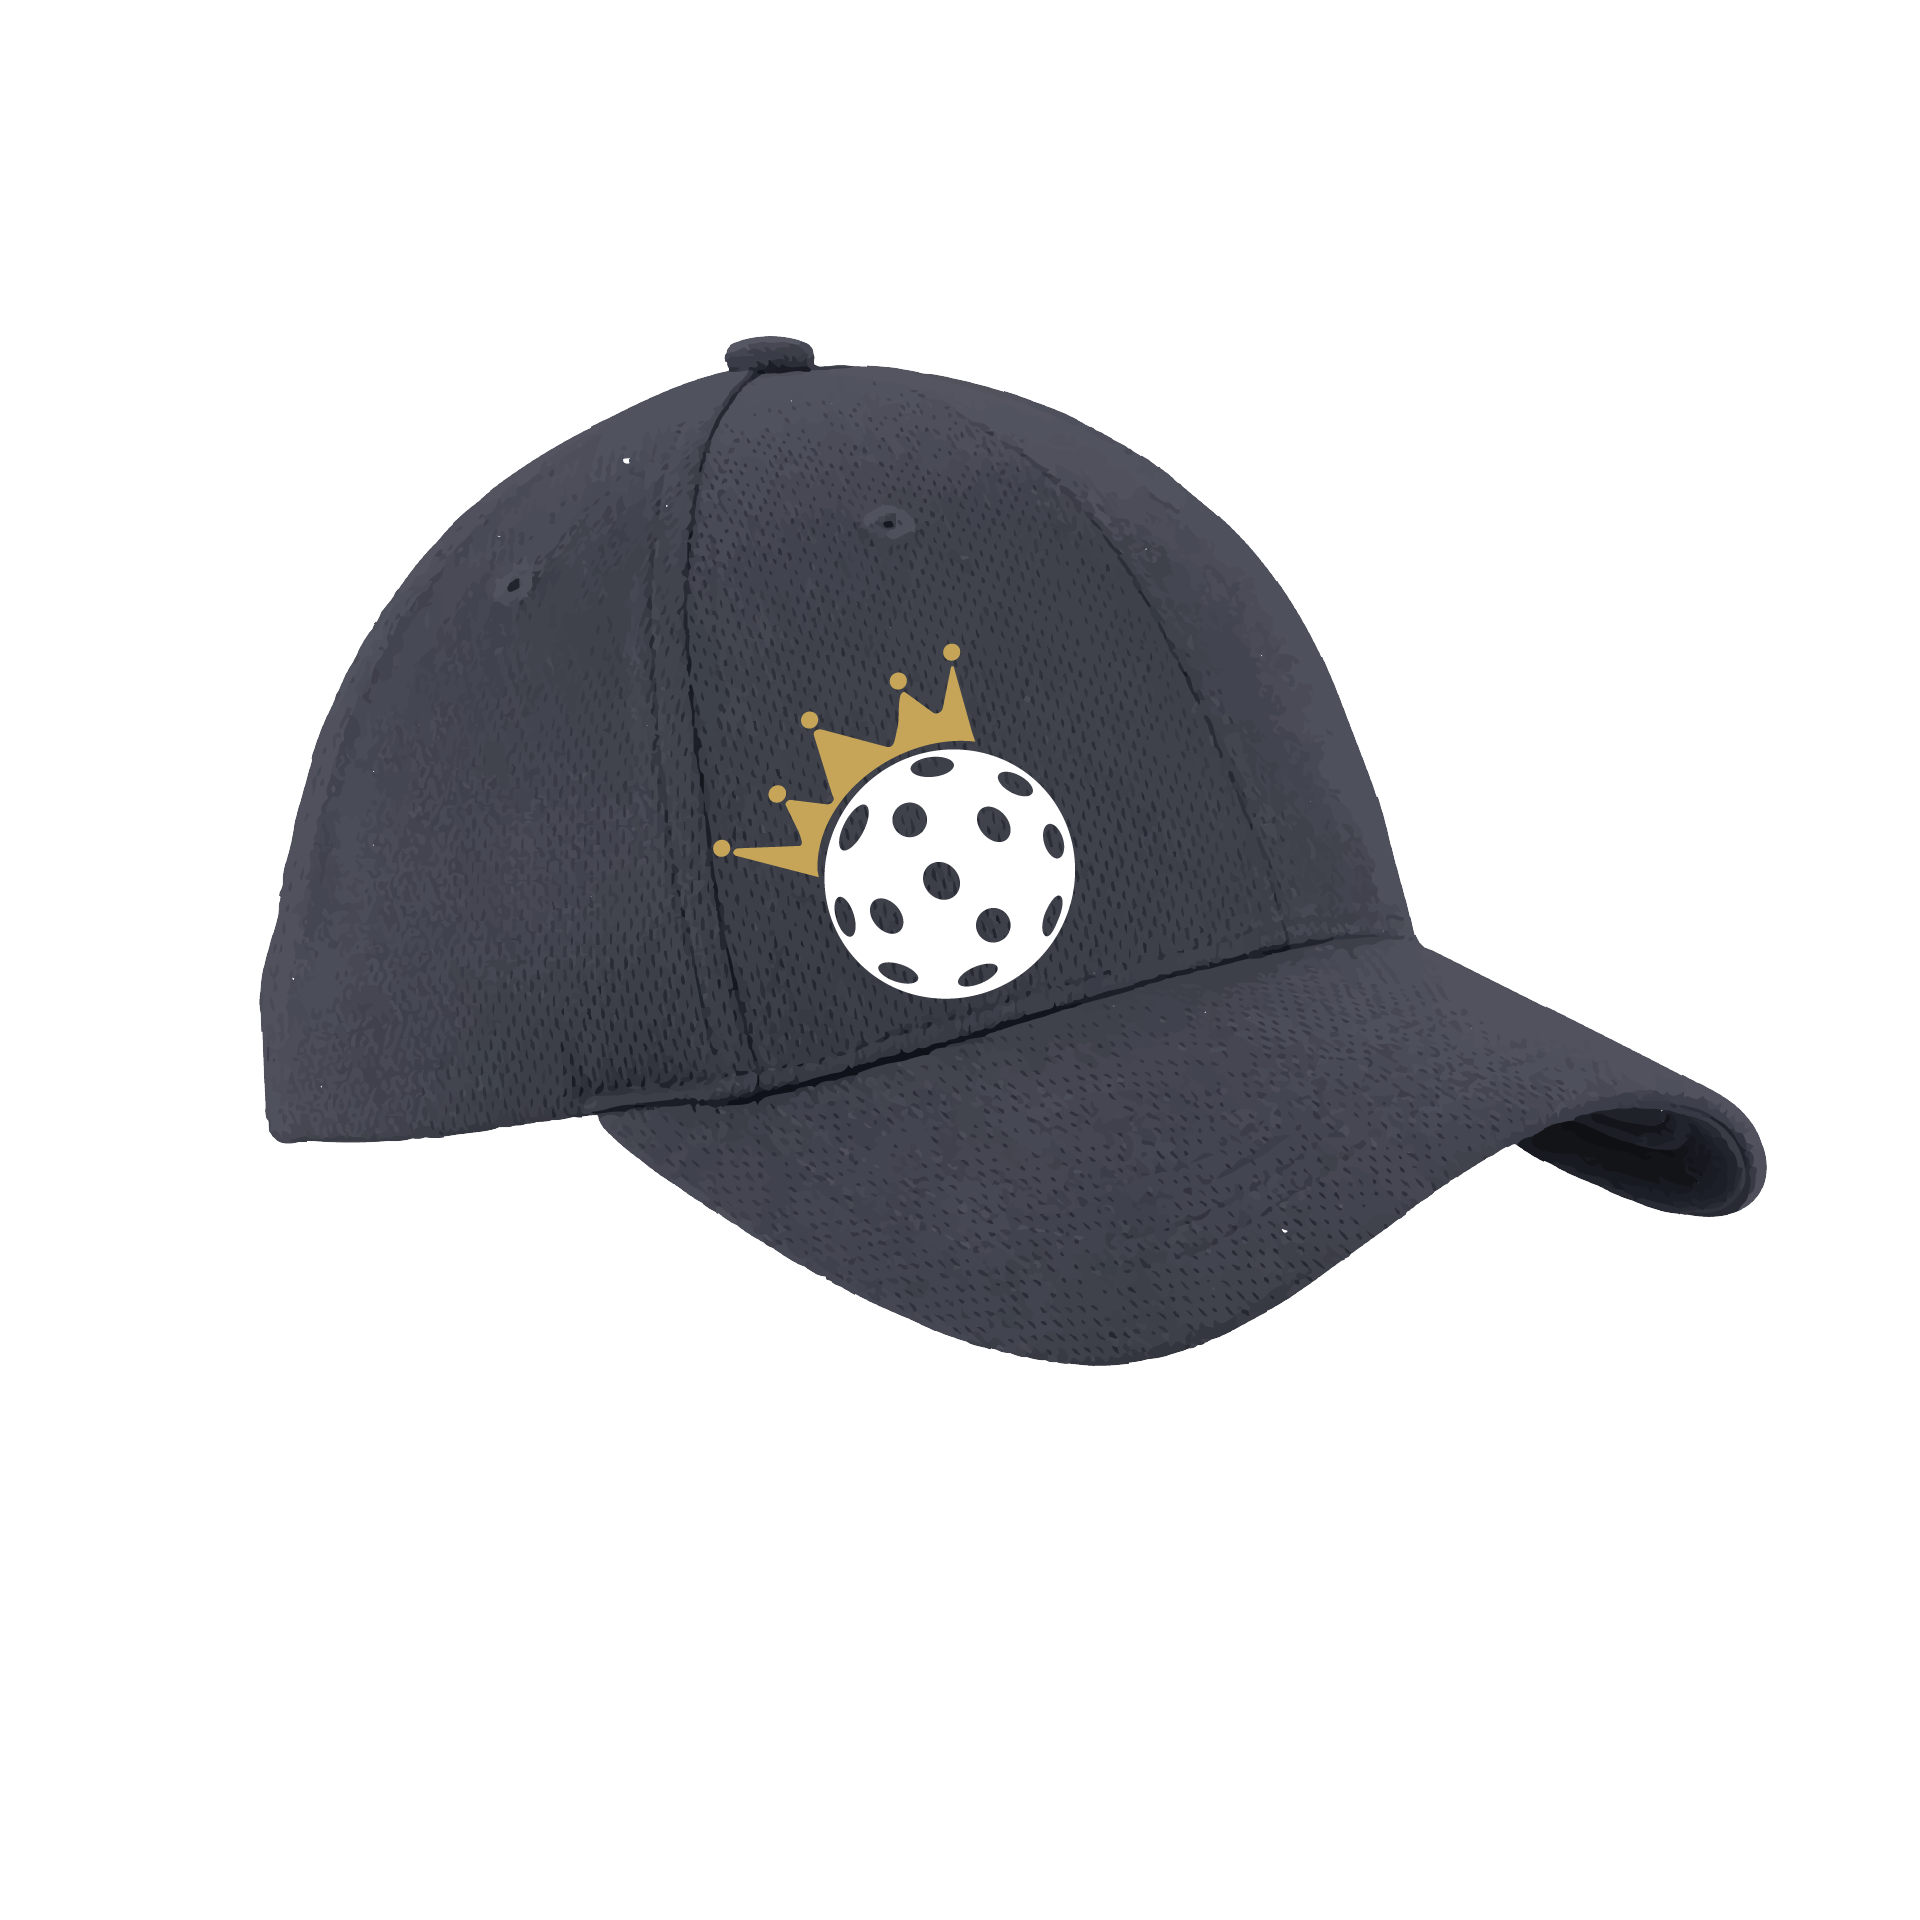 Pickleball Design: Pickleball Queen Crown  Score the winning point and look cute in this pickleball queen crown. Keep the sun out of your eyes and the sweat in check with 100% polyester and PosiCharge Technology. Dial in the perfect fit with the hook-and-loop closure made especially for grownups. Pickleball never looked so good! The UV protection and antimicrobial finish will keep you comfortable and protected on and off the court